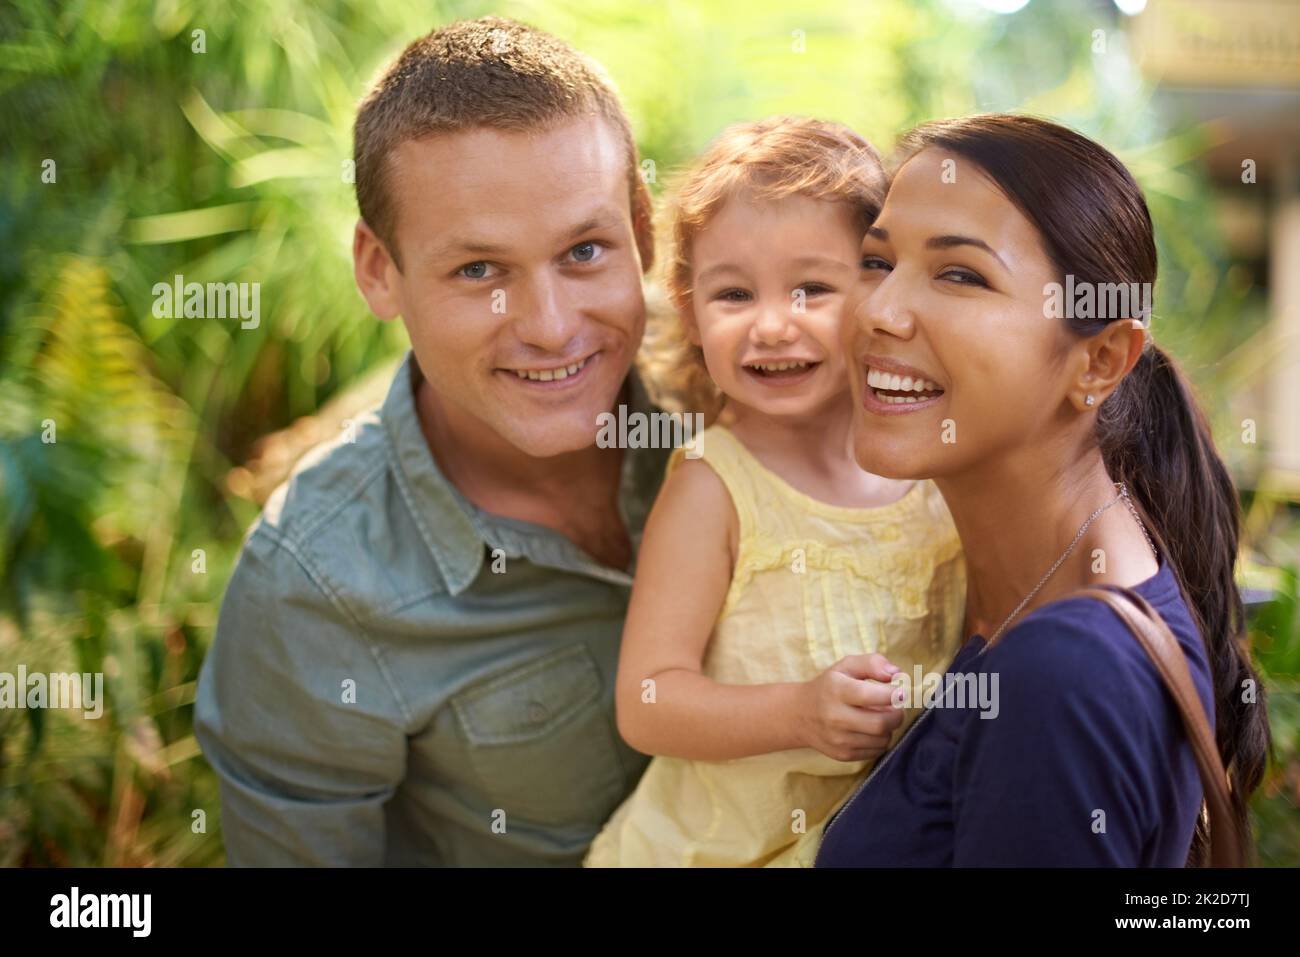 Their family outings are always fun. Cropped shot of a family on an outing at a tourist attraction. Stock Photo